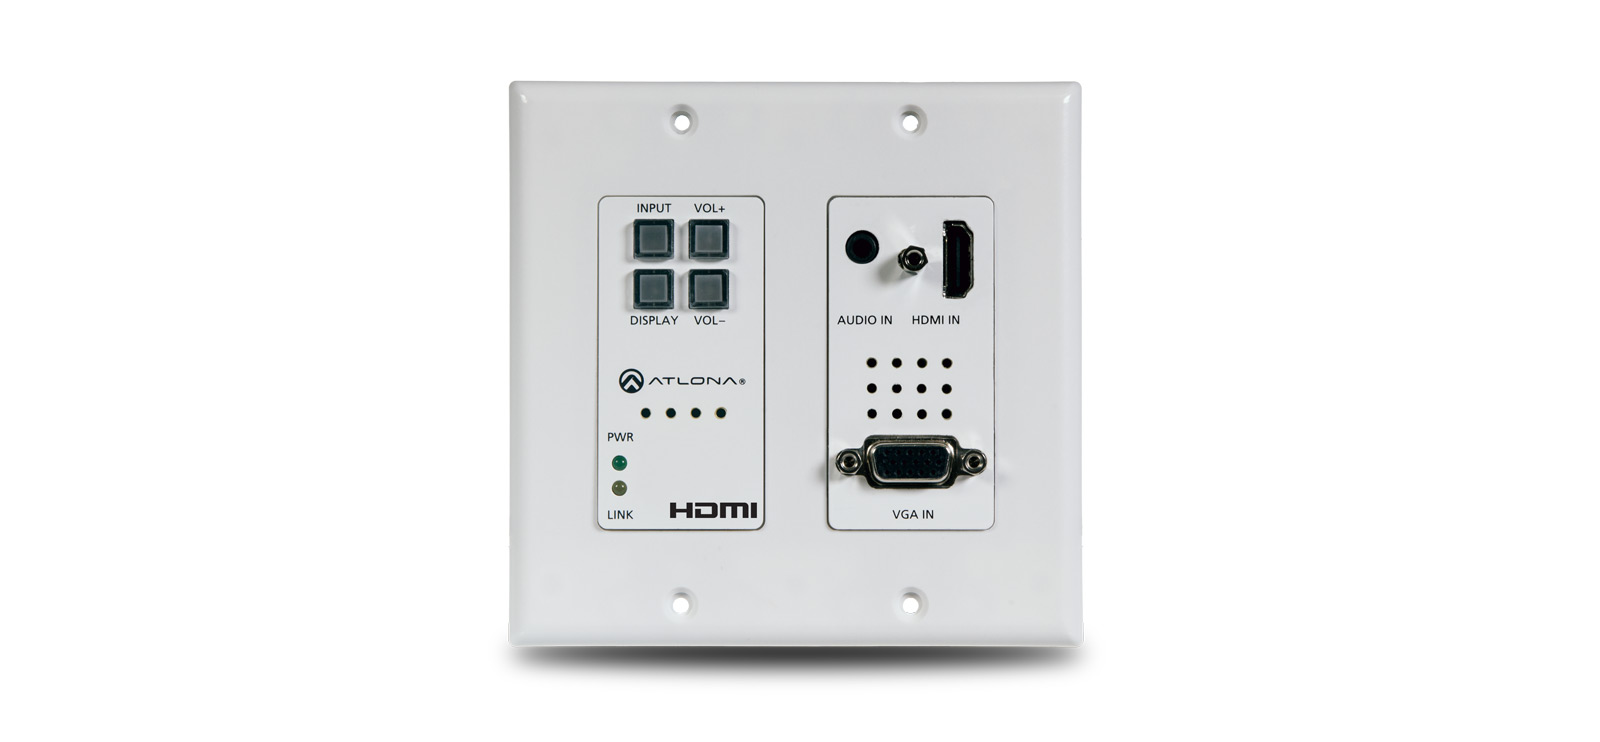 AT-HDVS-200-TX-WP with Ethernet port concealed